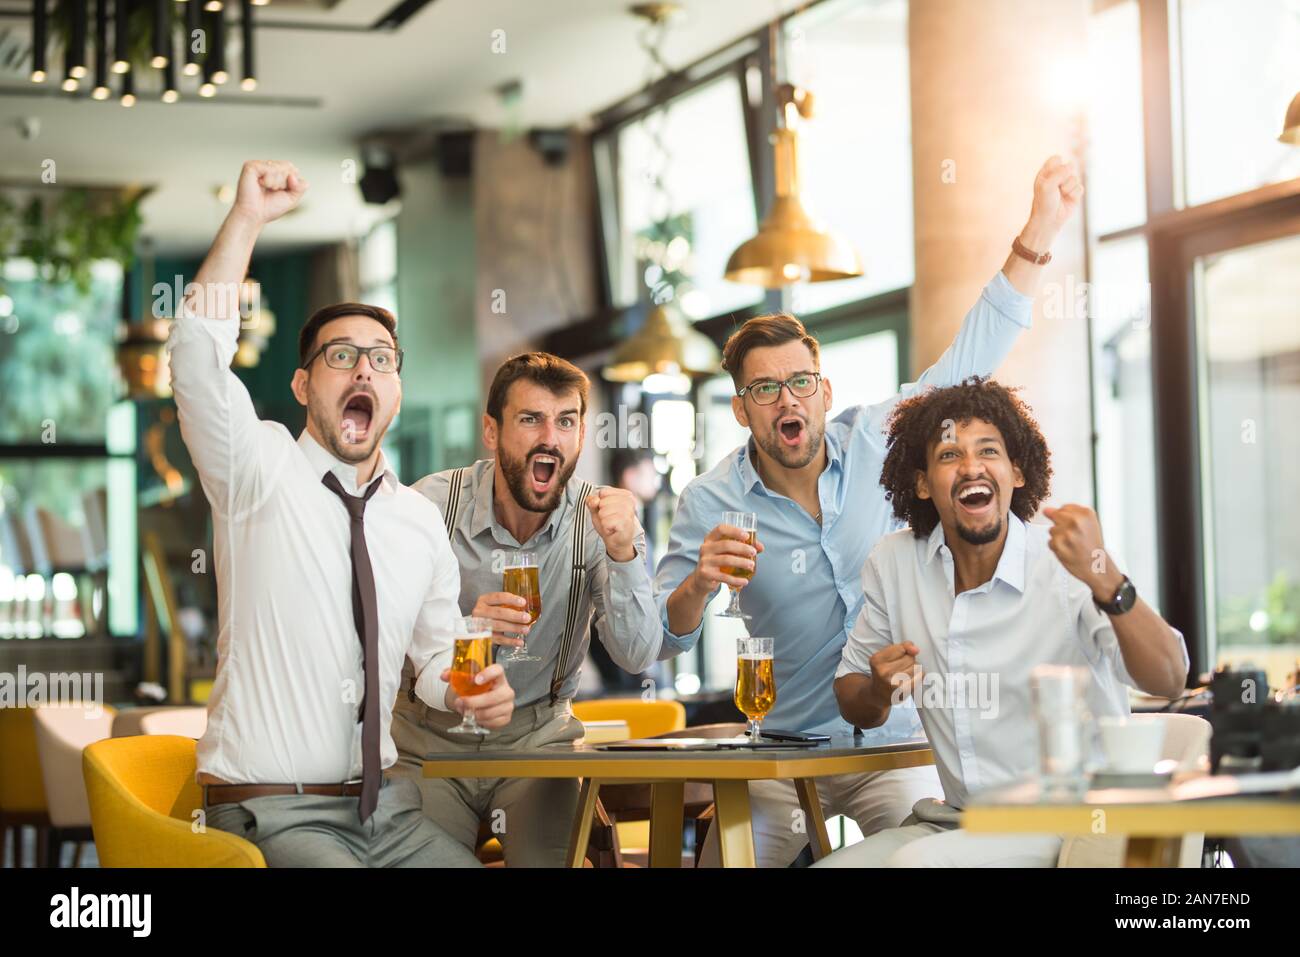 business people cheering on beer. Business people watch the game and cheer for their team Stock Photo